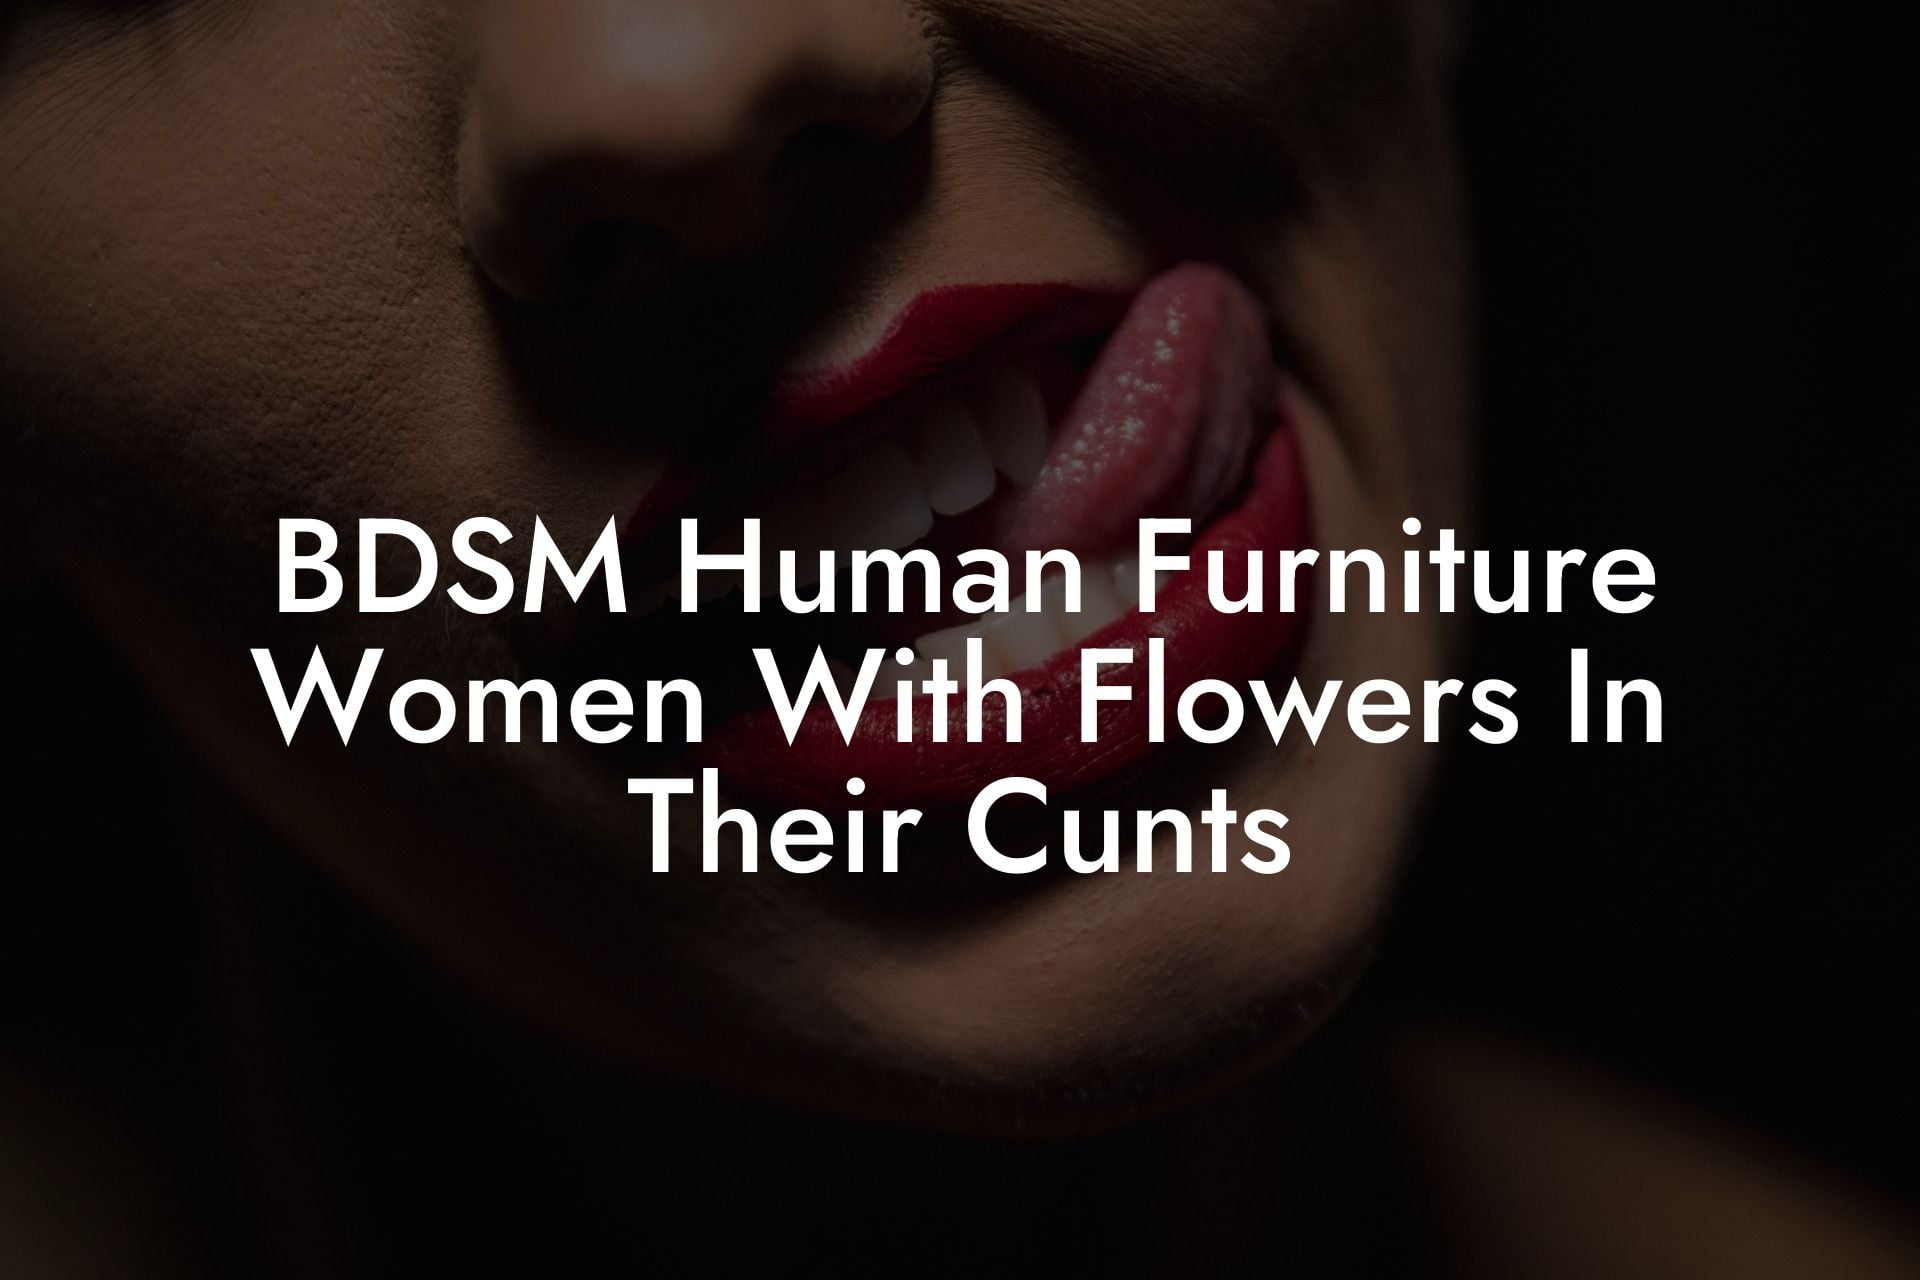 BDSM Human Furniture Women With Flowers In Their Cunts